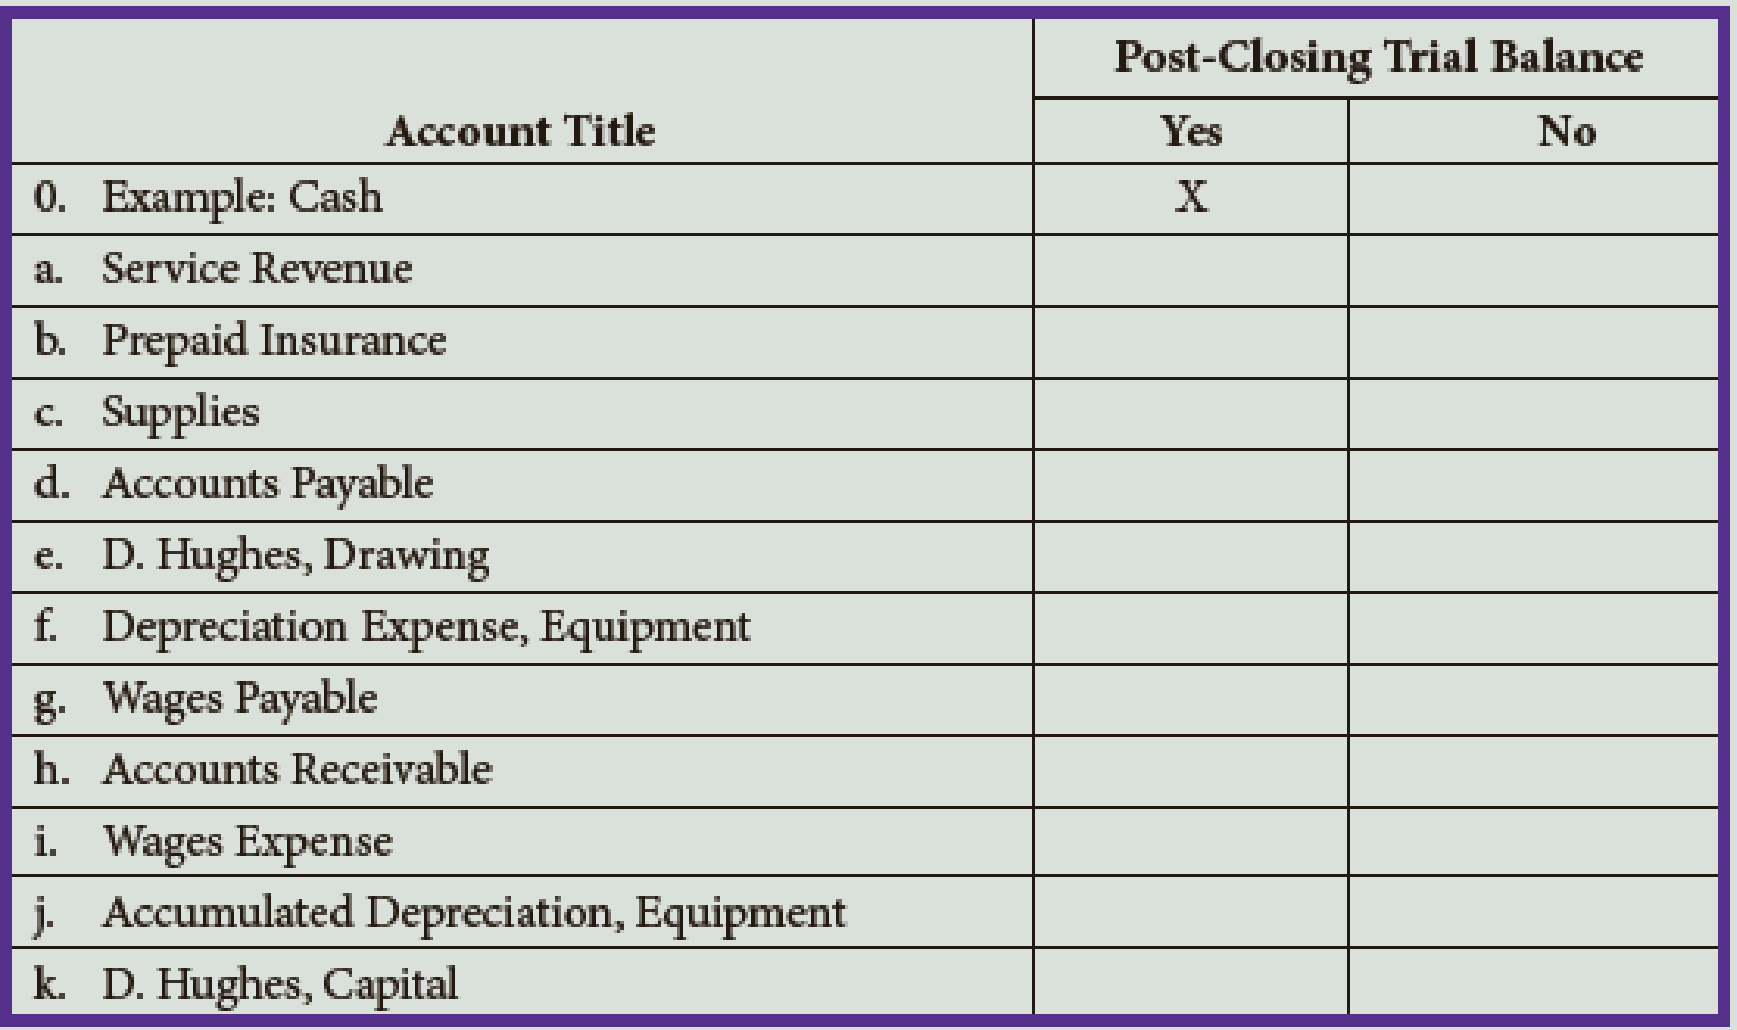 Chapter 5, Problem 7E, Identify whether the following accounts would be included on a post-closing trial balance. 